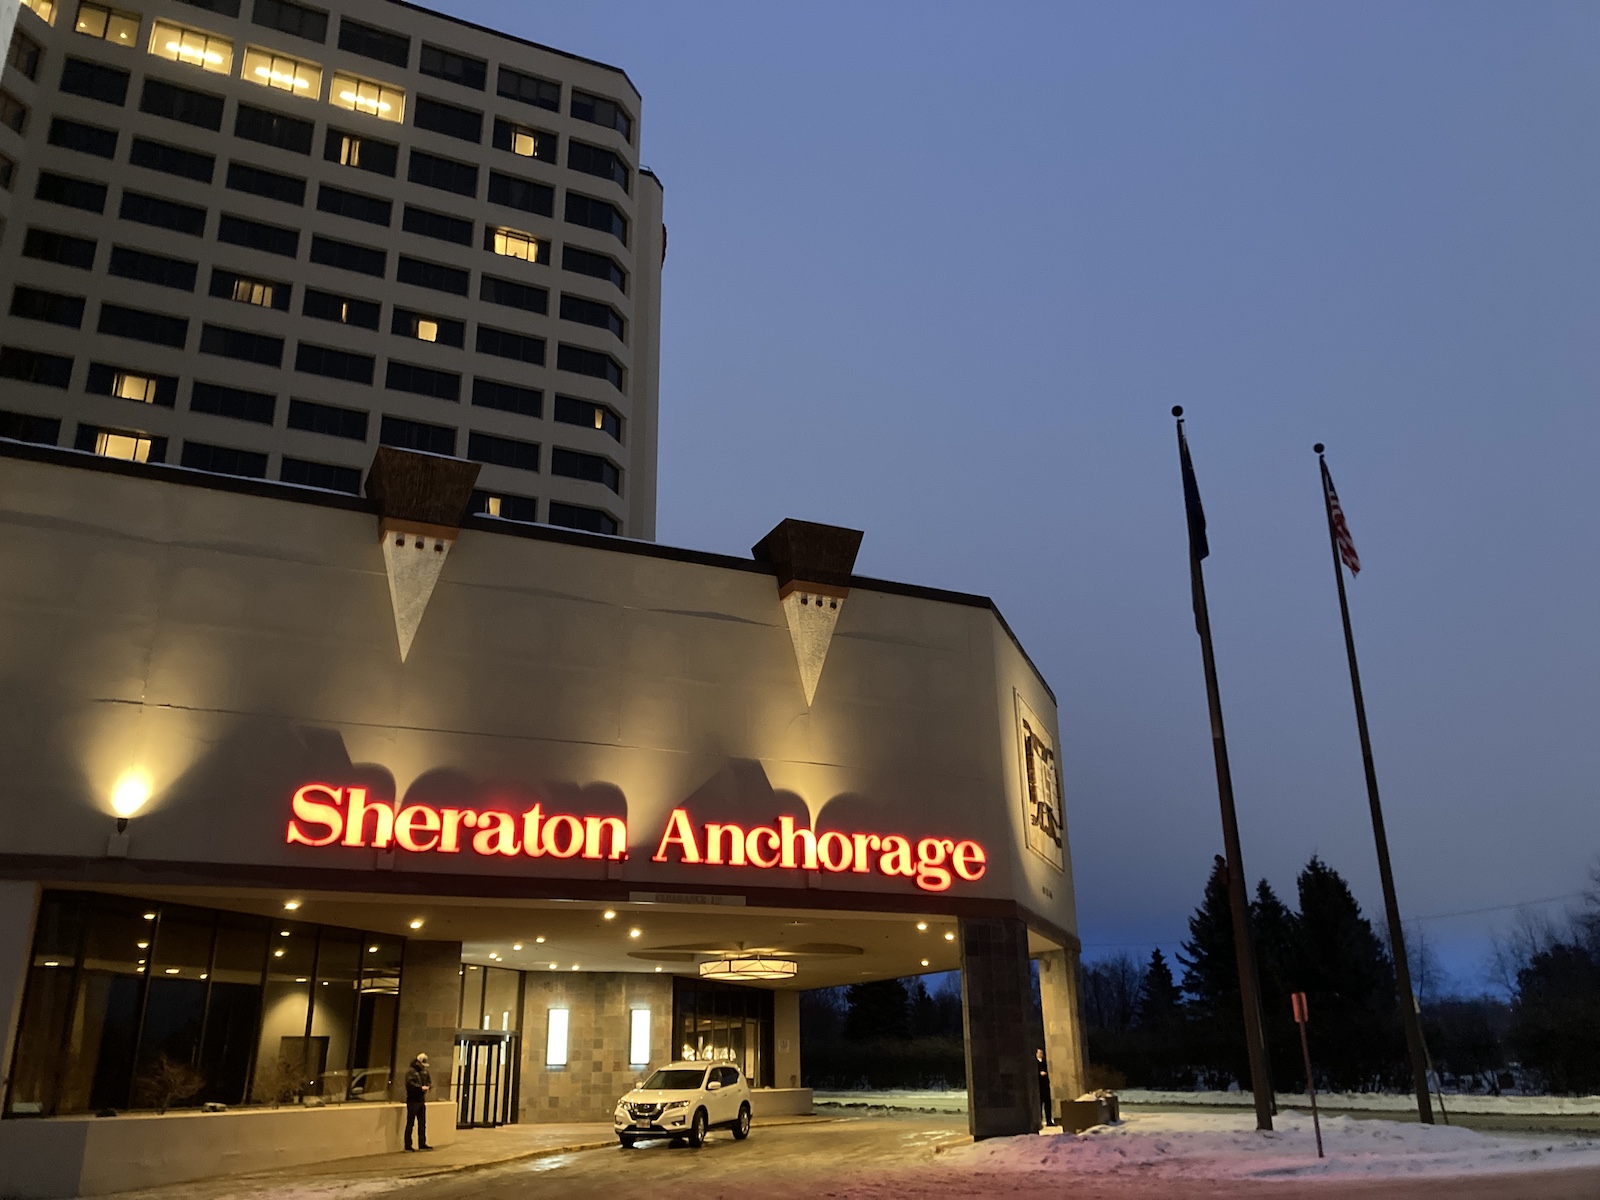 Exterior image of Sheraton Anchorage hotel, taken for review purpose.